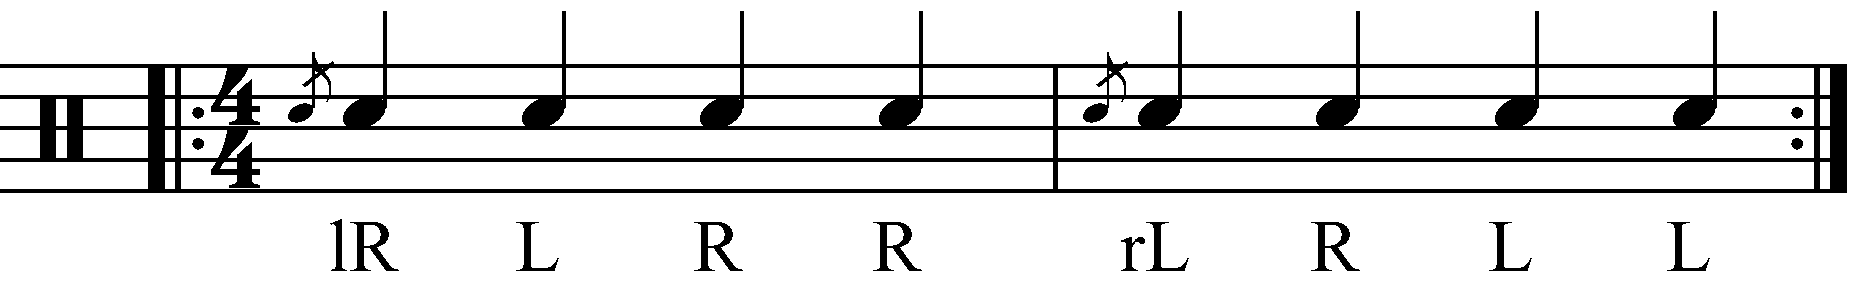 The Flamadiddle as quarter notes